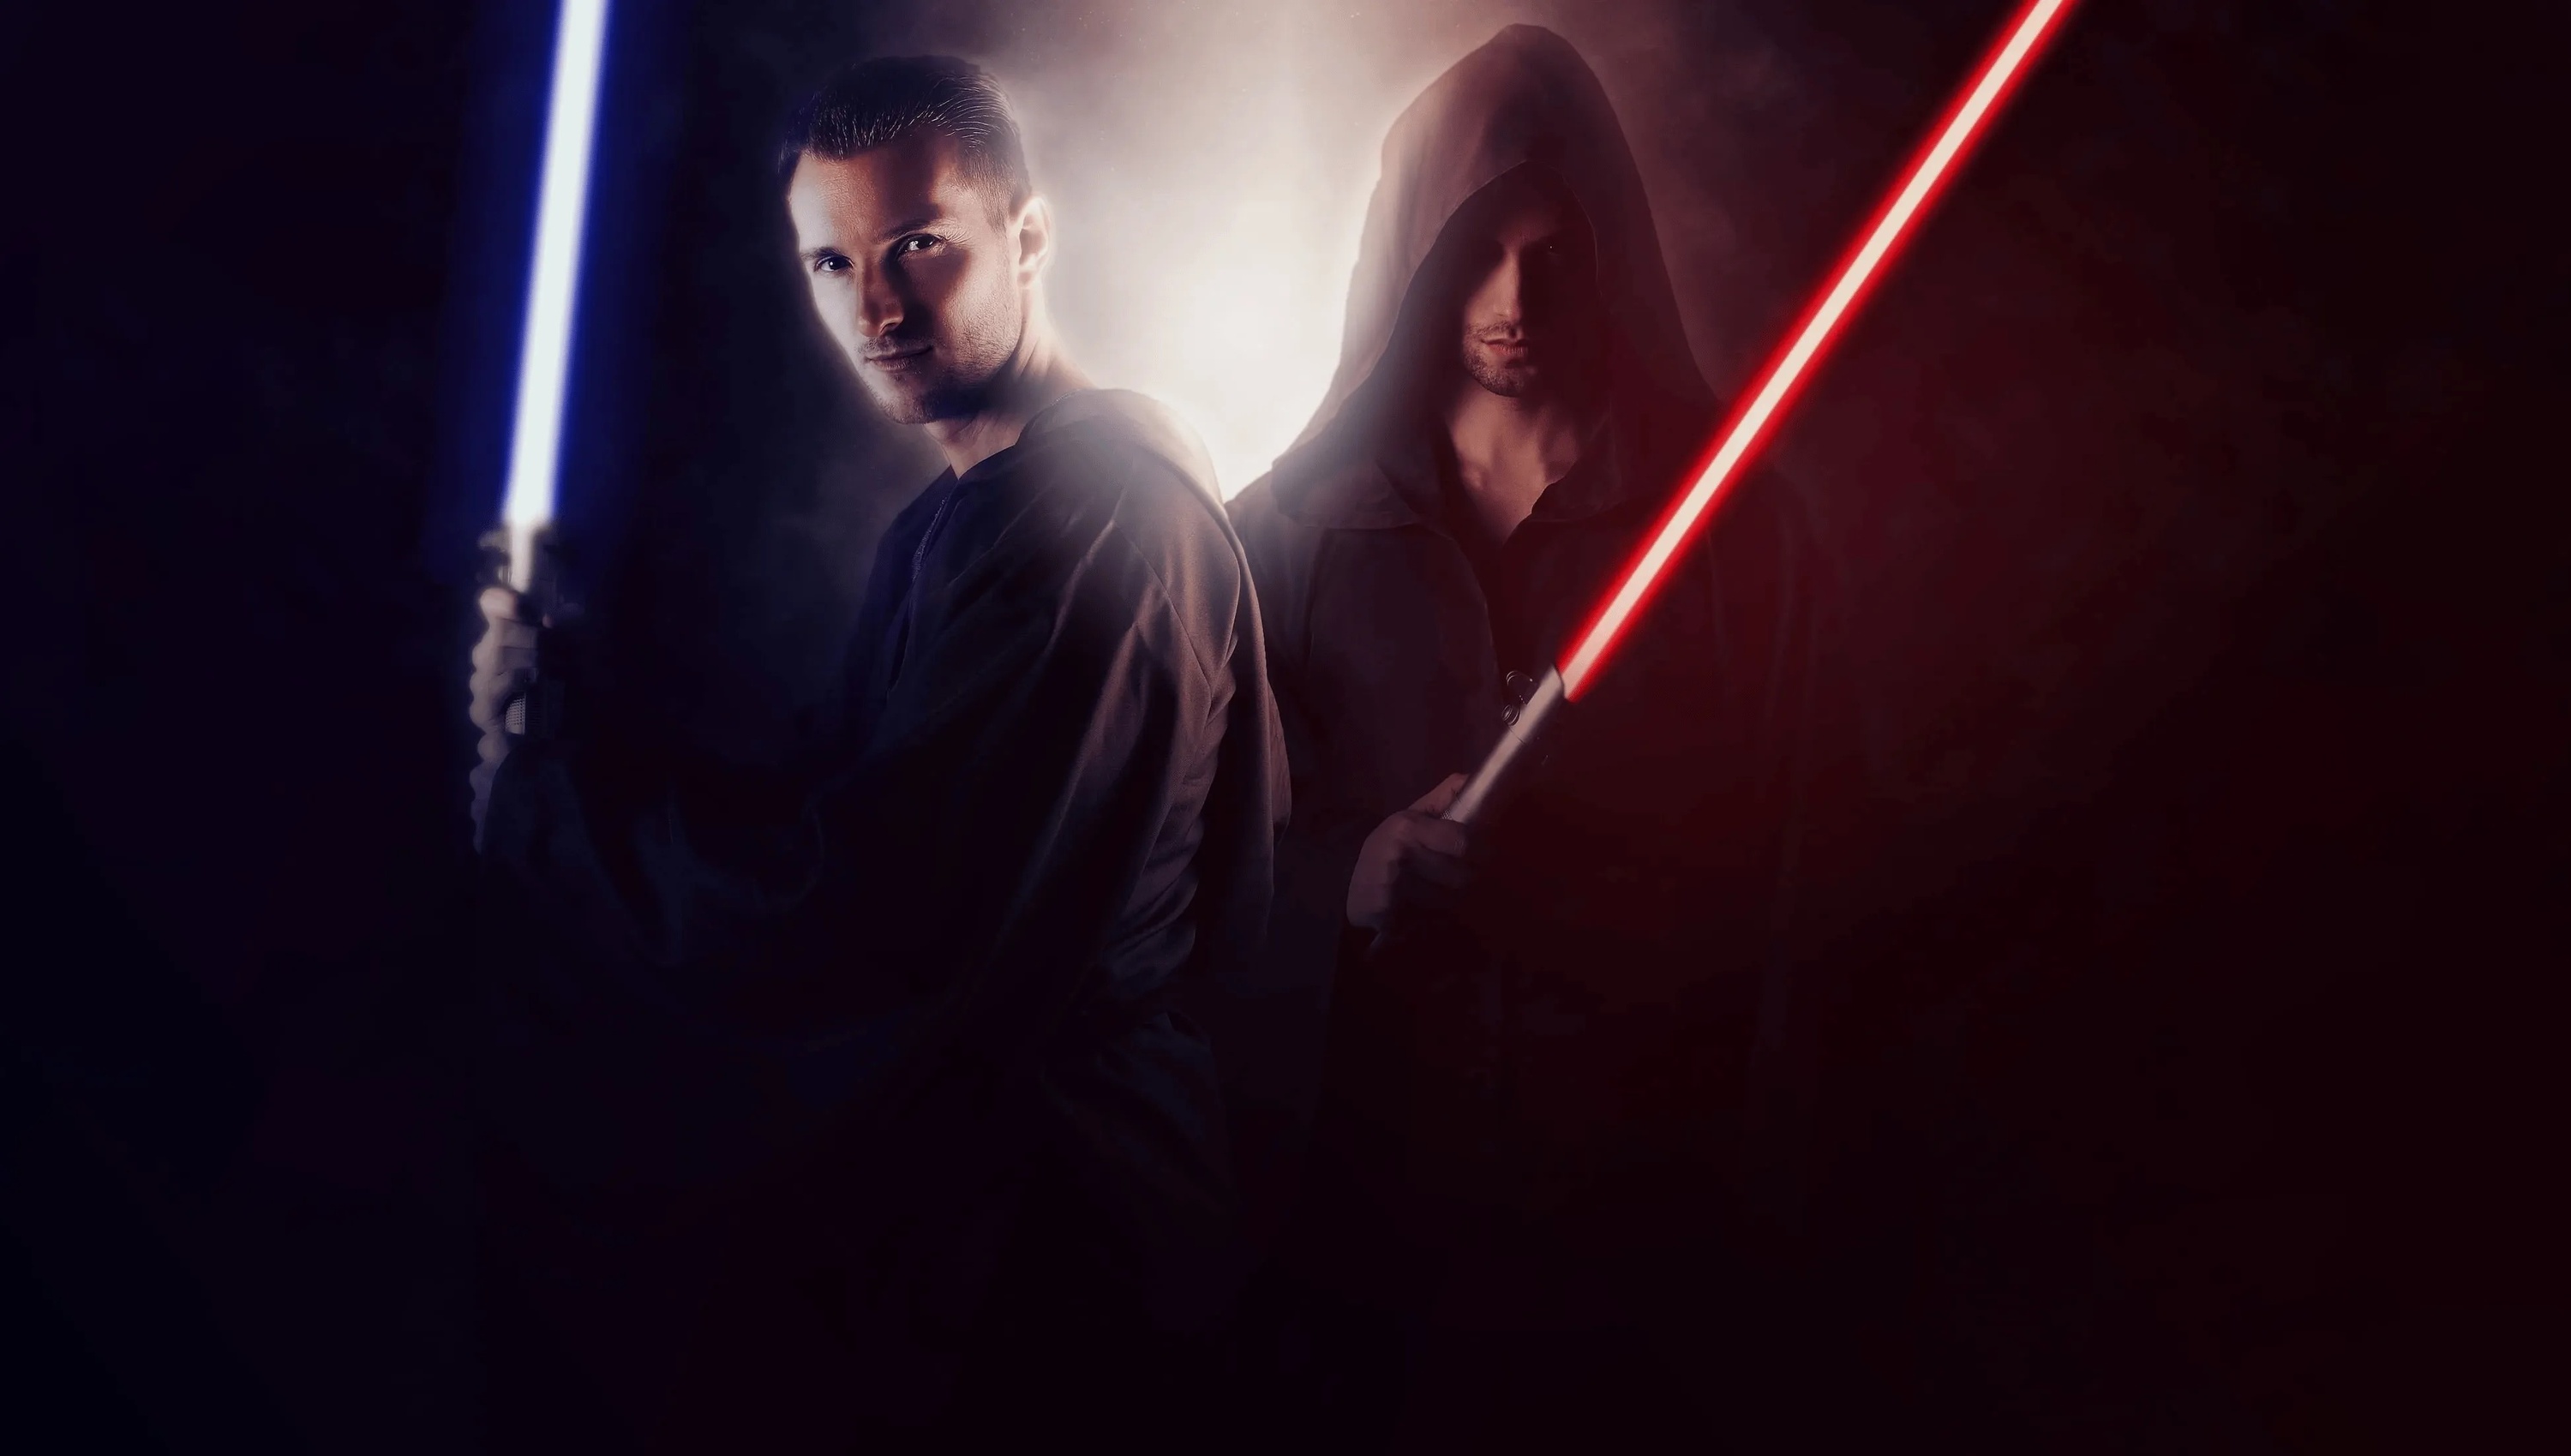 two men holding lightsabers in a dark room